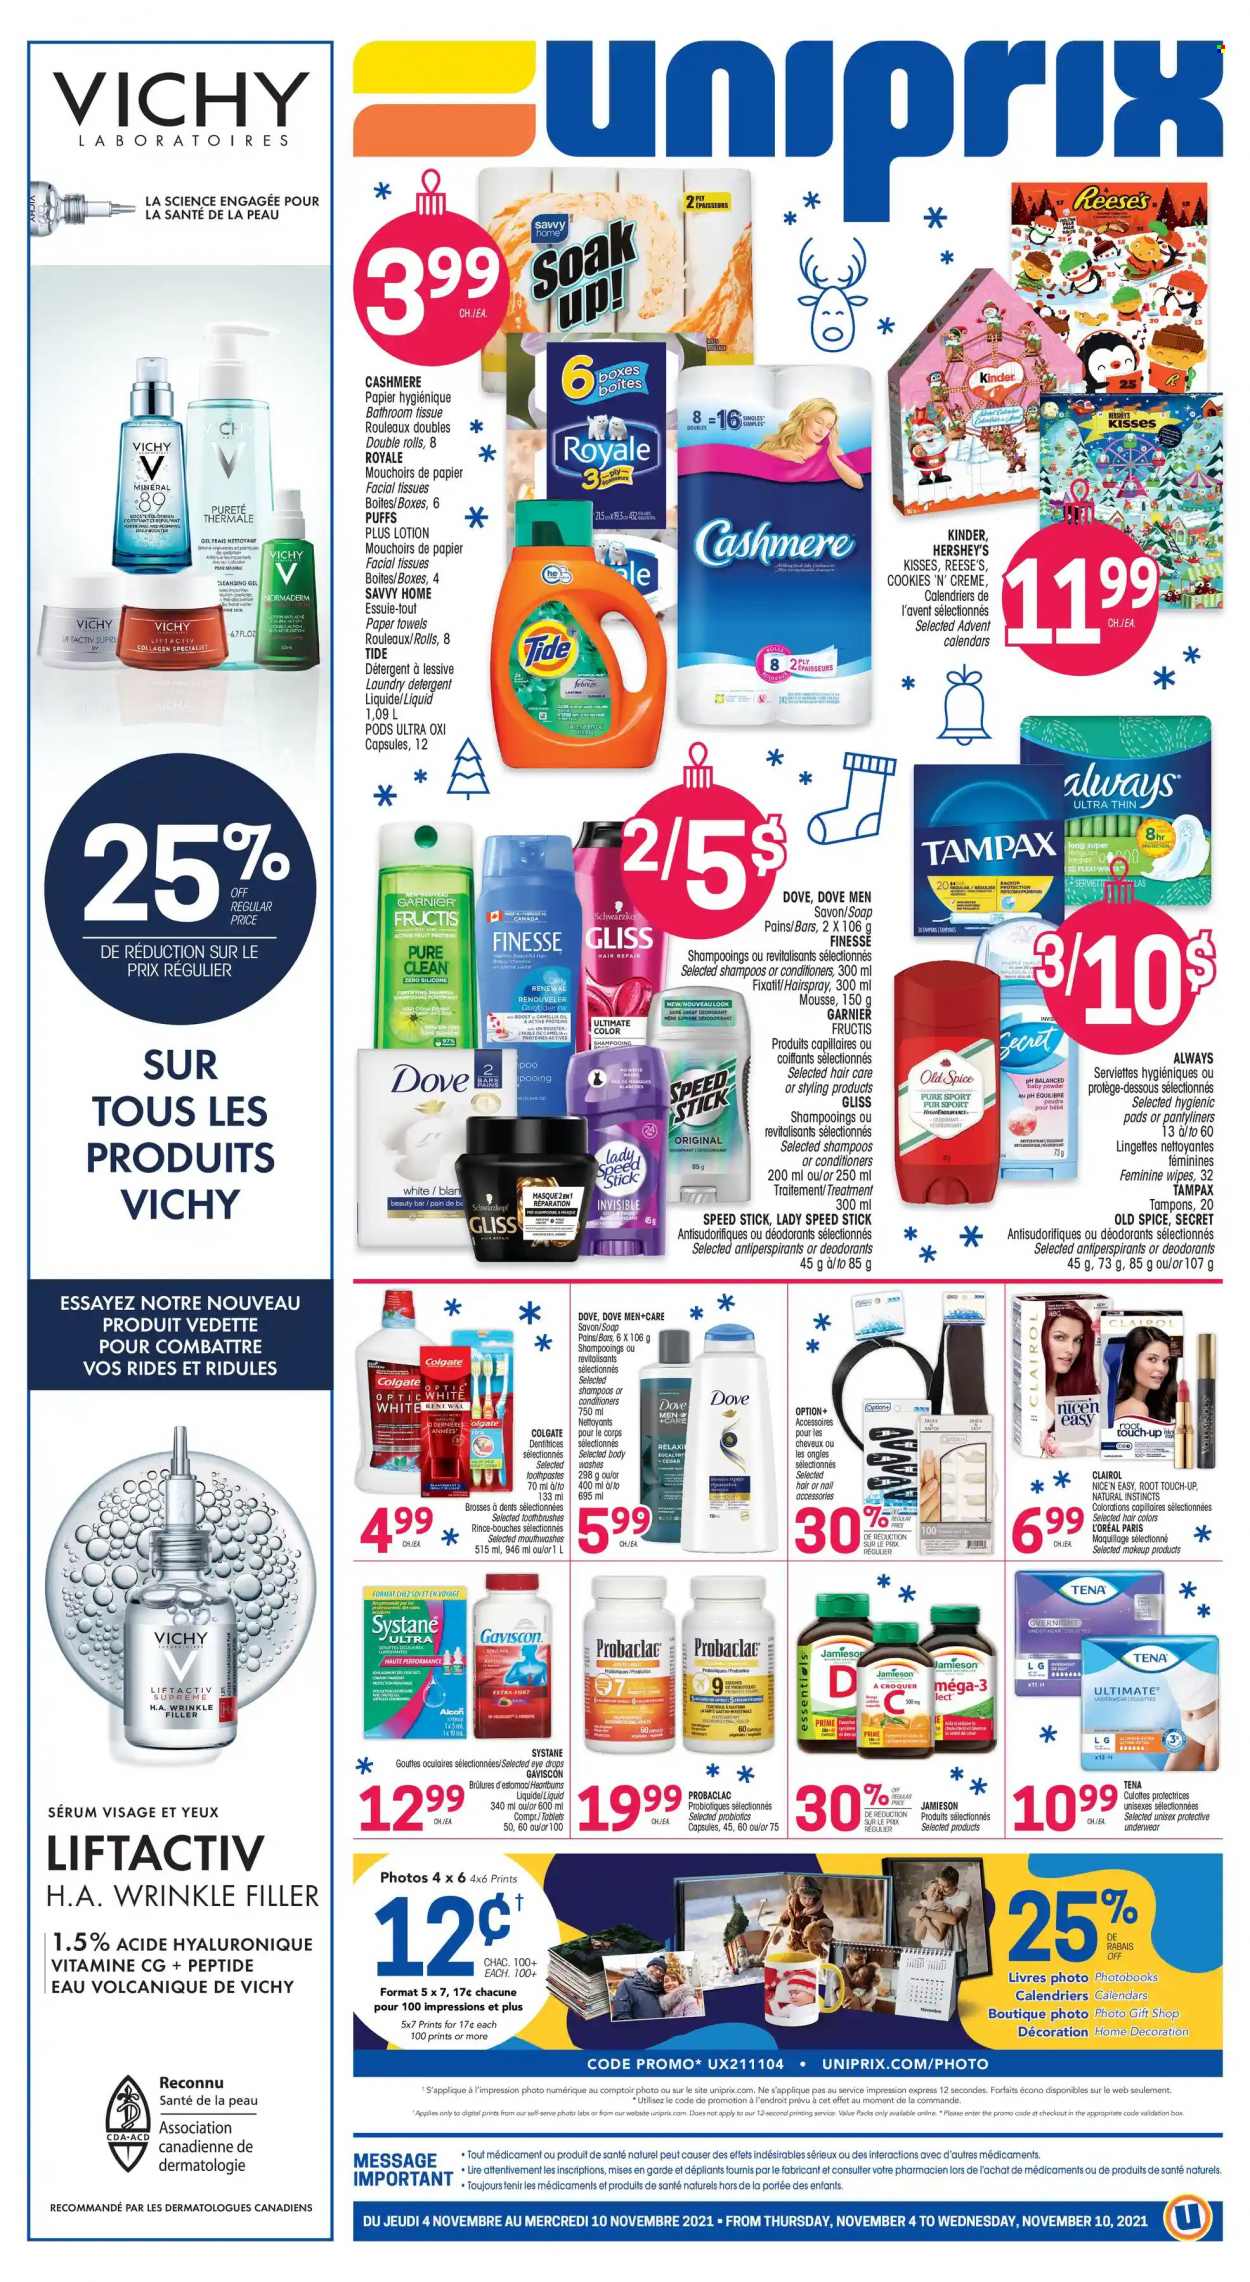 thumbnail - Uniprix Flyer - November 04, 2021 - November 10, 2021 - Sales products - cookies, Reese's, Hershey's, puffs, spice, oil, Boost, wipes, baby powder, bath tissue, kitchen towels, paper towels, Febreze, Tide, laundry detergent, XTRA, Vichy, Gliss, soap, Always pads, pantyliners, tampons, facial tissues, L’Oréal, serum, Root Touch-Up, Clairol, Fructis, anti-perspirant, Speed Stick, makeup, probiotics, eye drops, Gaviscon, detergent, Dove, Colgate, Garnier, Systane, Tampax, Old Spice, Schwarzkopf, deodorant. Page 1.